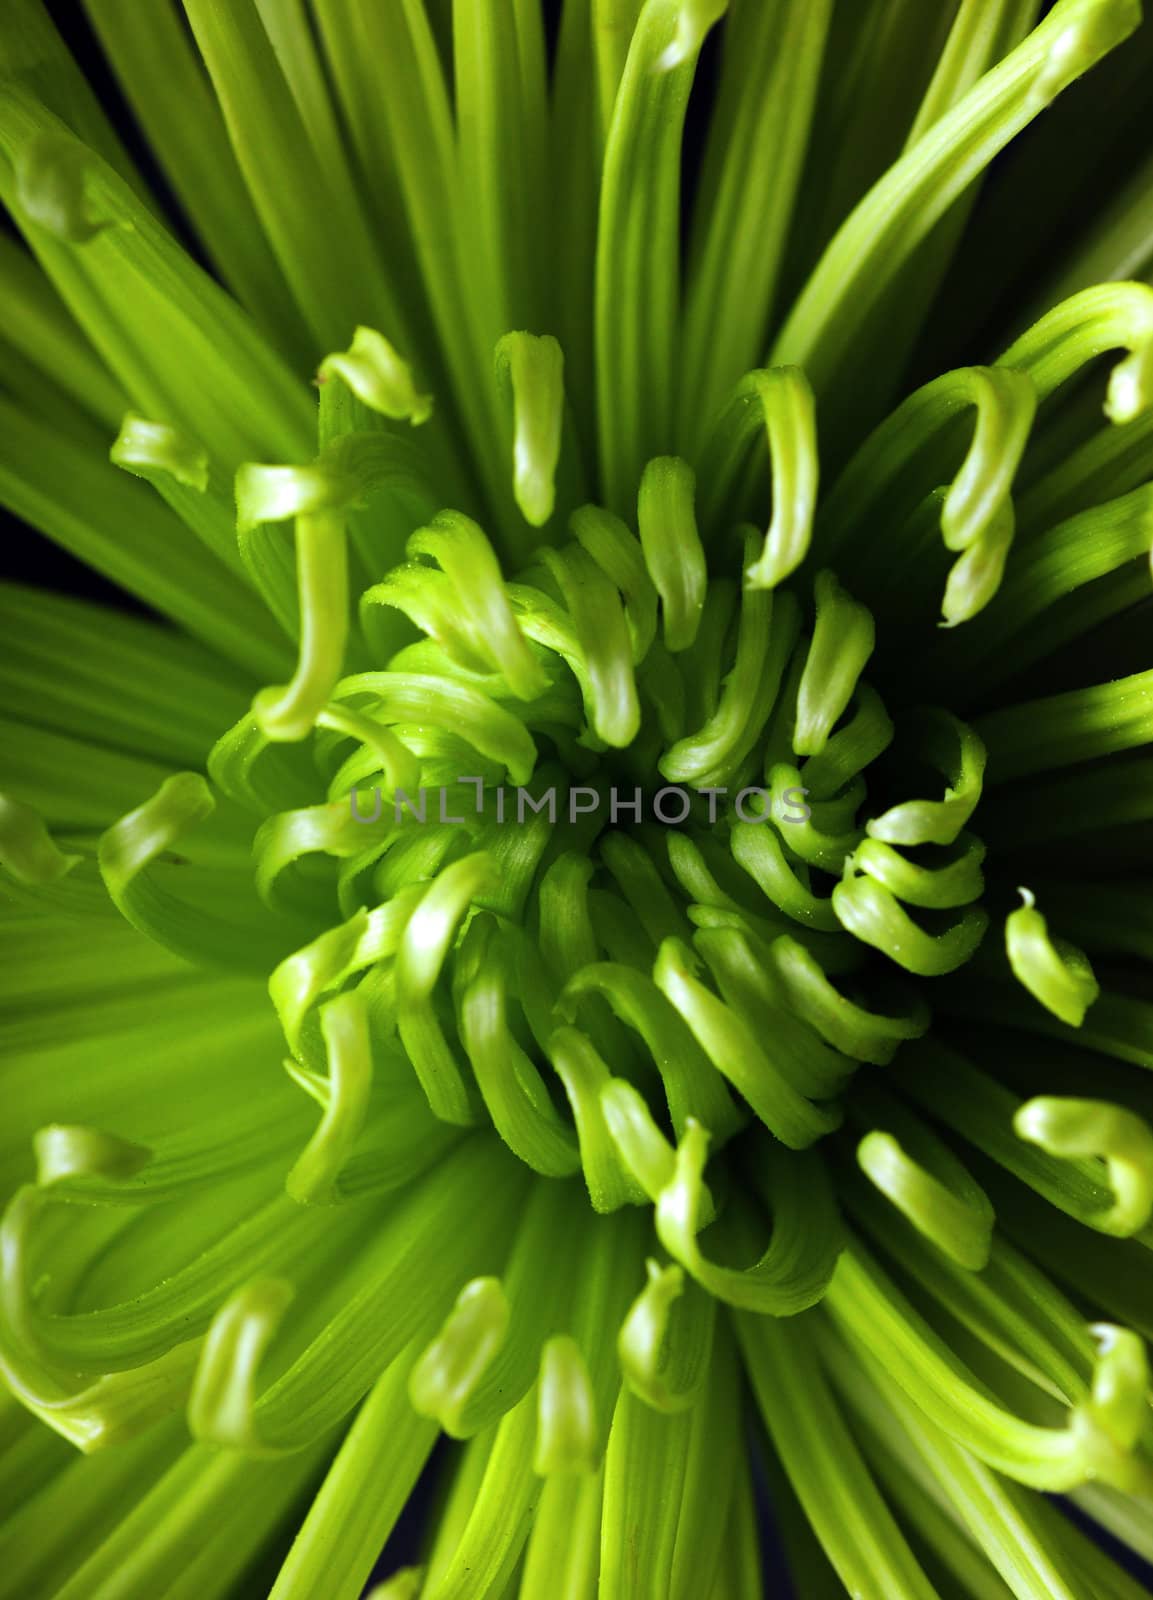 A bright green close up image of a Chrysanthemum isolated on a black background